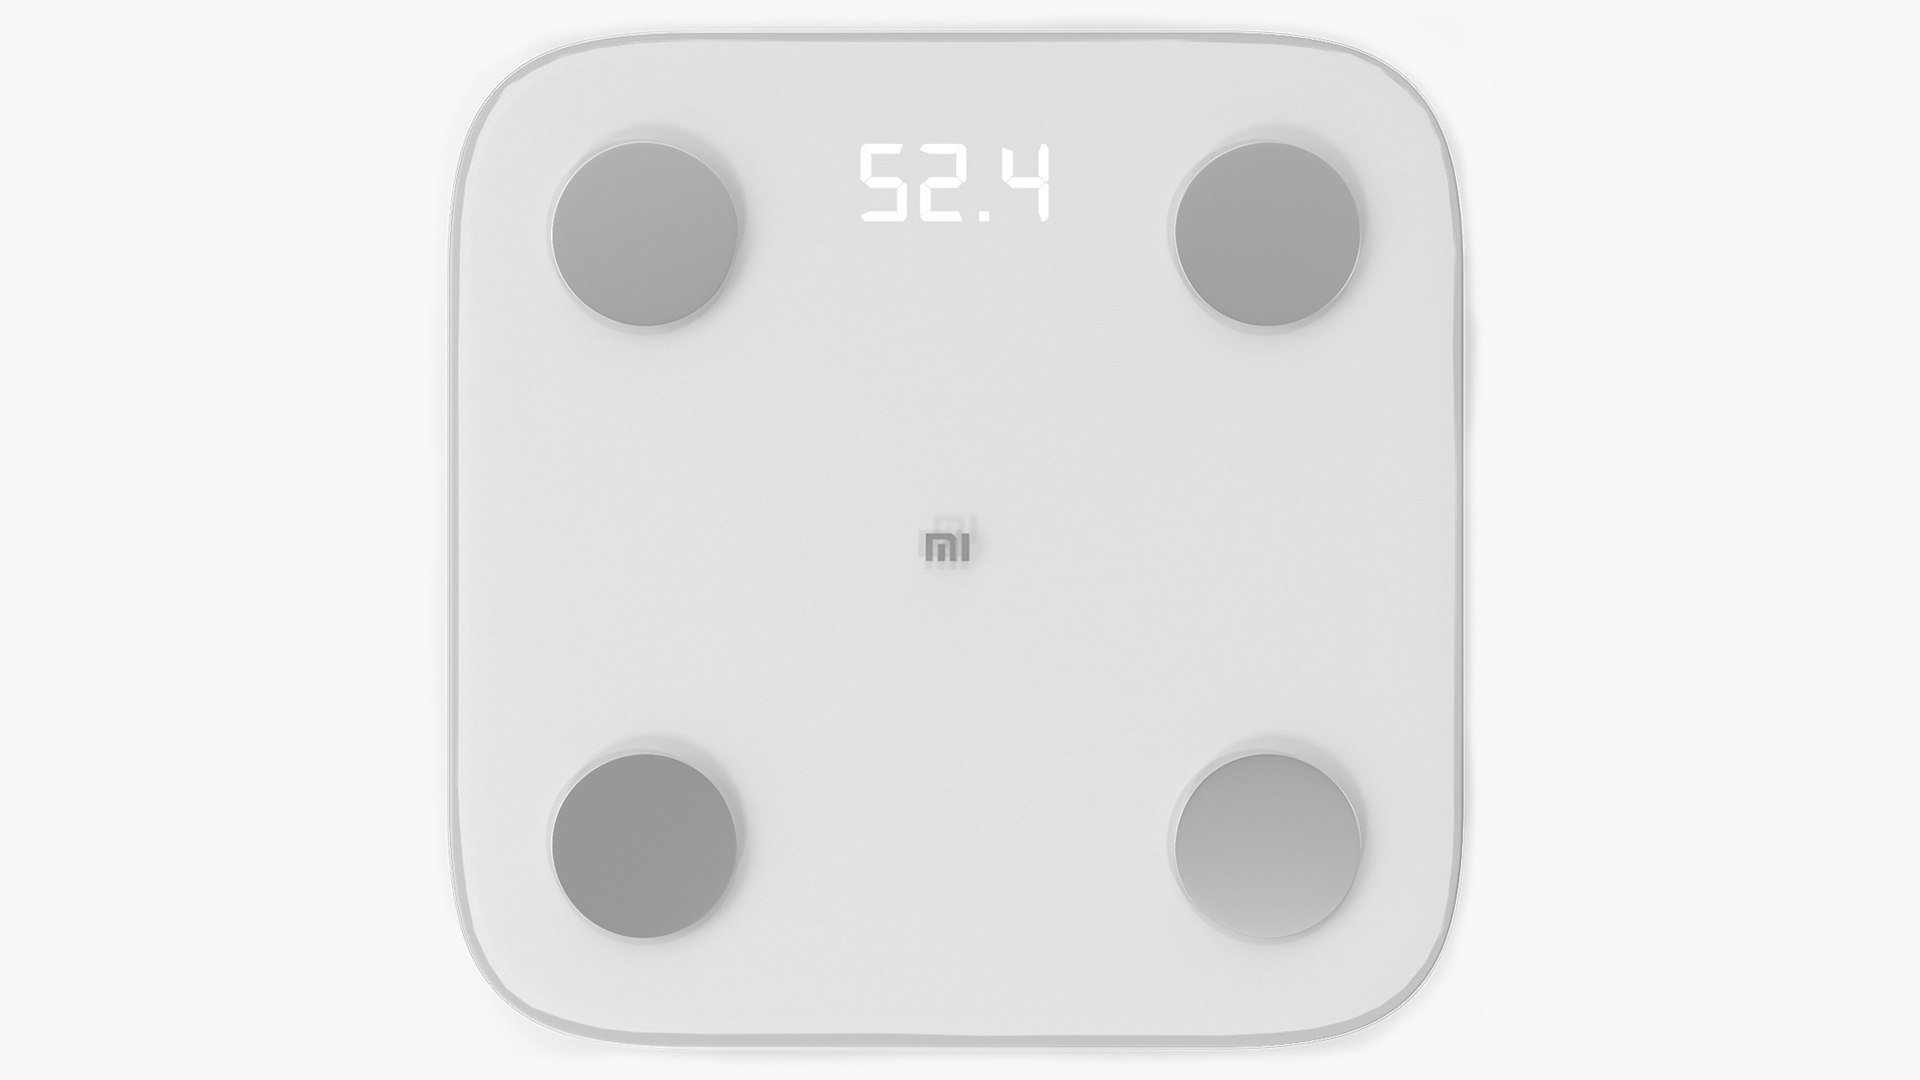 Xiaomi Mi Body Composition Scale 2 Review, Gallery posted by  Wikawee-Kru'Yim